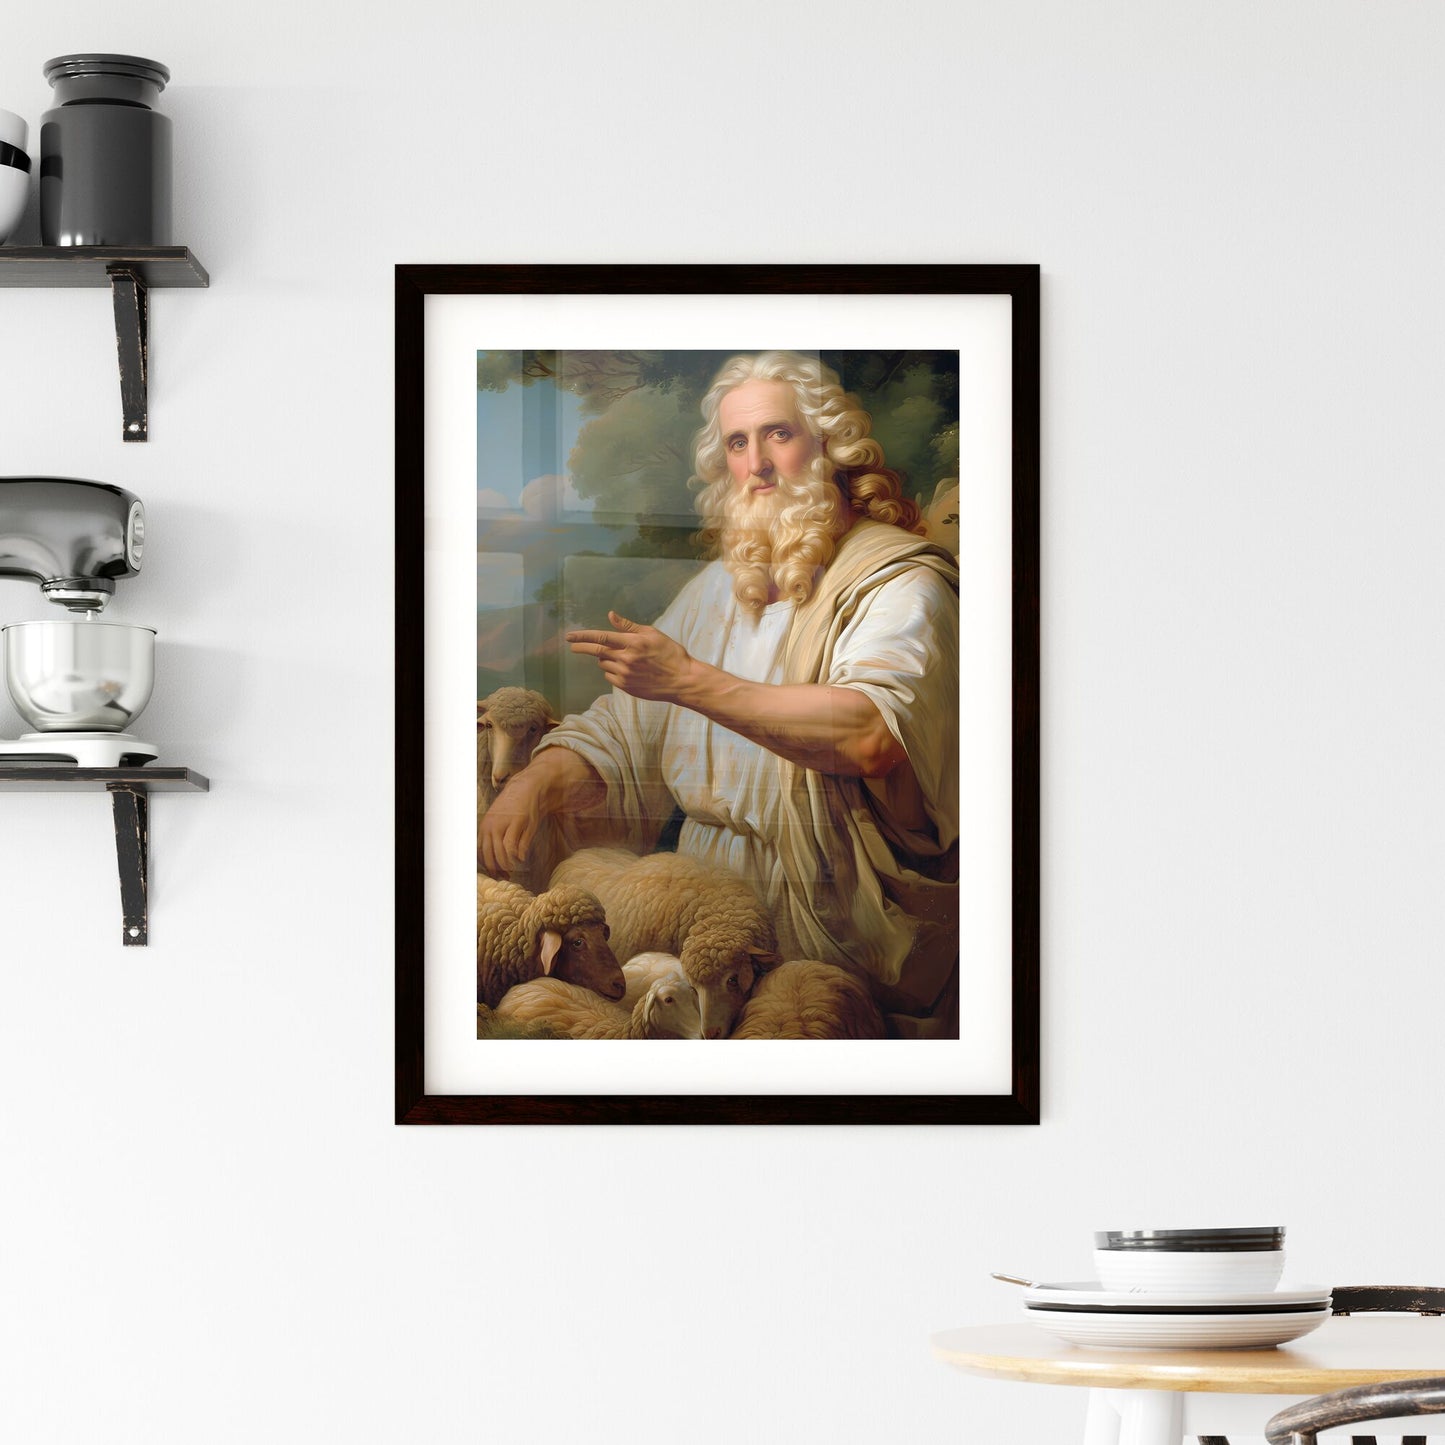 Moses prophet of God herding the flock in the desert, looking up at the sky - Art print of a painting of a man with a beard and sheep Default Title